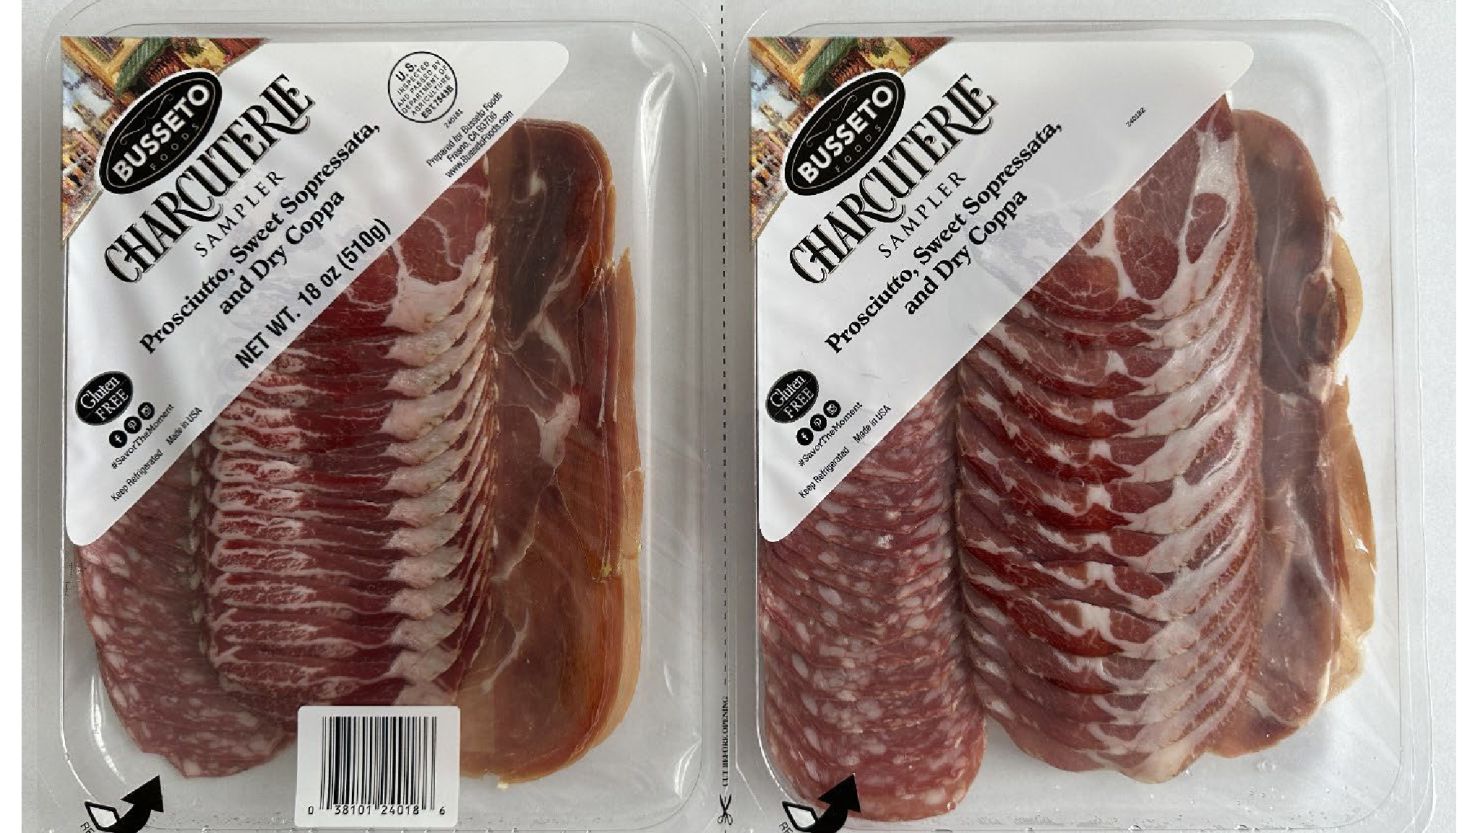 Busseto charcuterie samplers have been recalled as dozens of salmonella illnesses have been reported in 14 states.